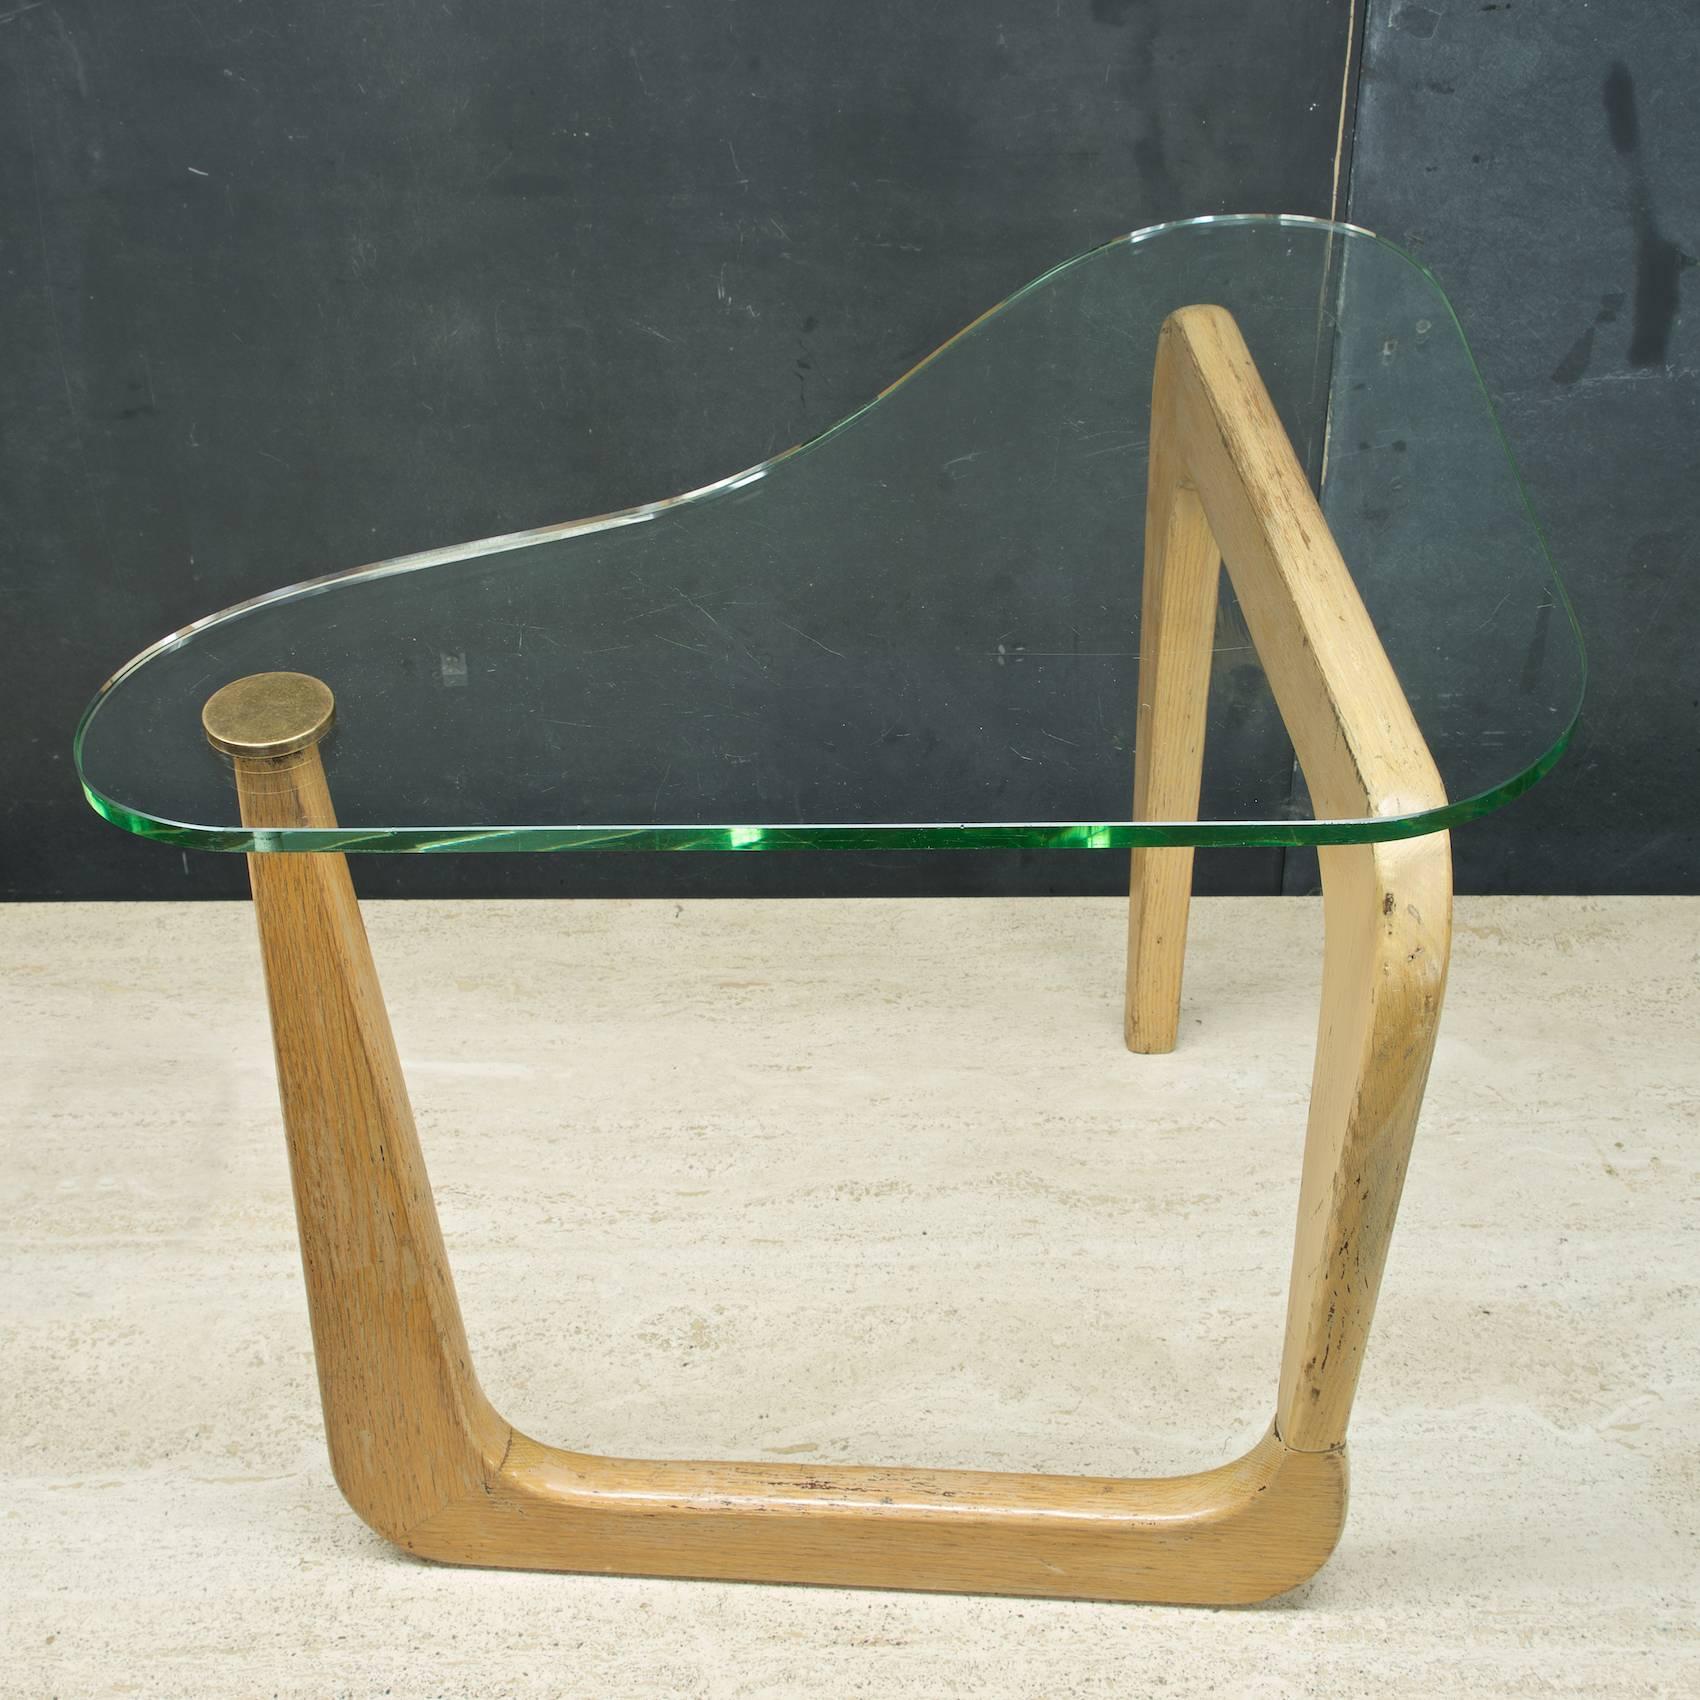 The documented designer/maker is unknown. Atomic boomerang glass sofa table. 